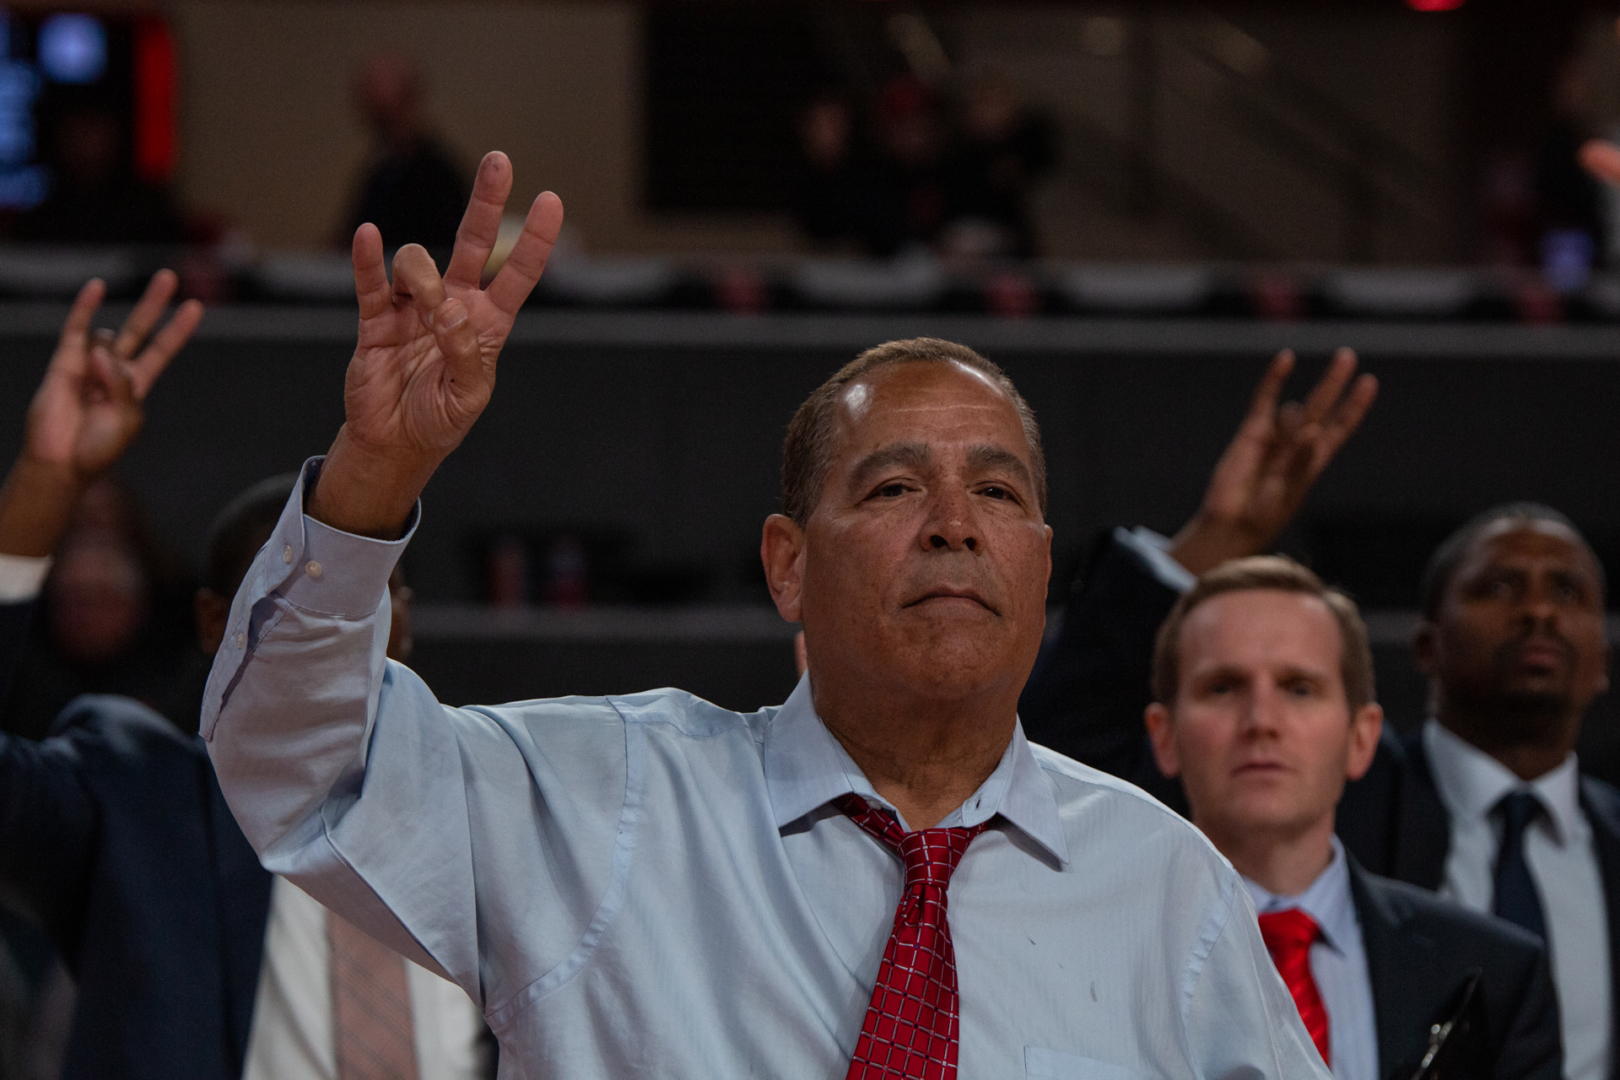 Head coach Kelvin Sampson on the death of George Floyd: "It’s caused every American to take an inventory of themselves. It’s forced us to answer some questions we don’t like talking about.” | Kathryn Lenihan/The Cougar